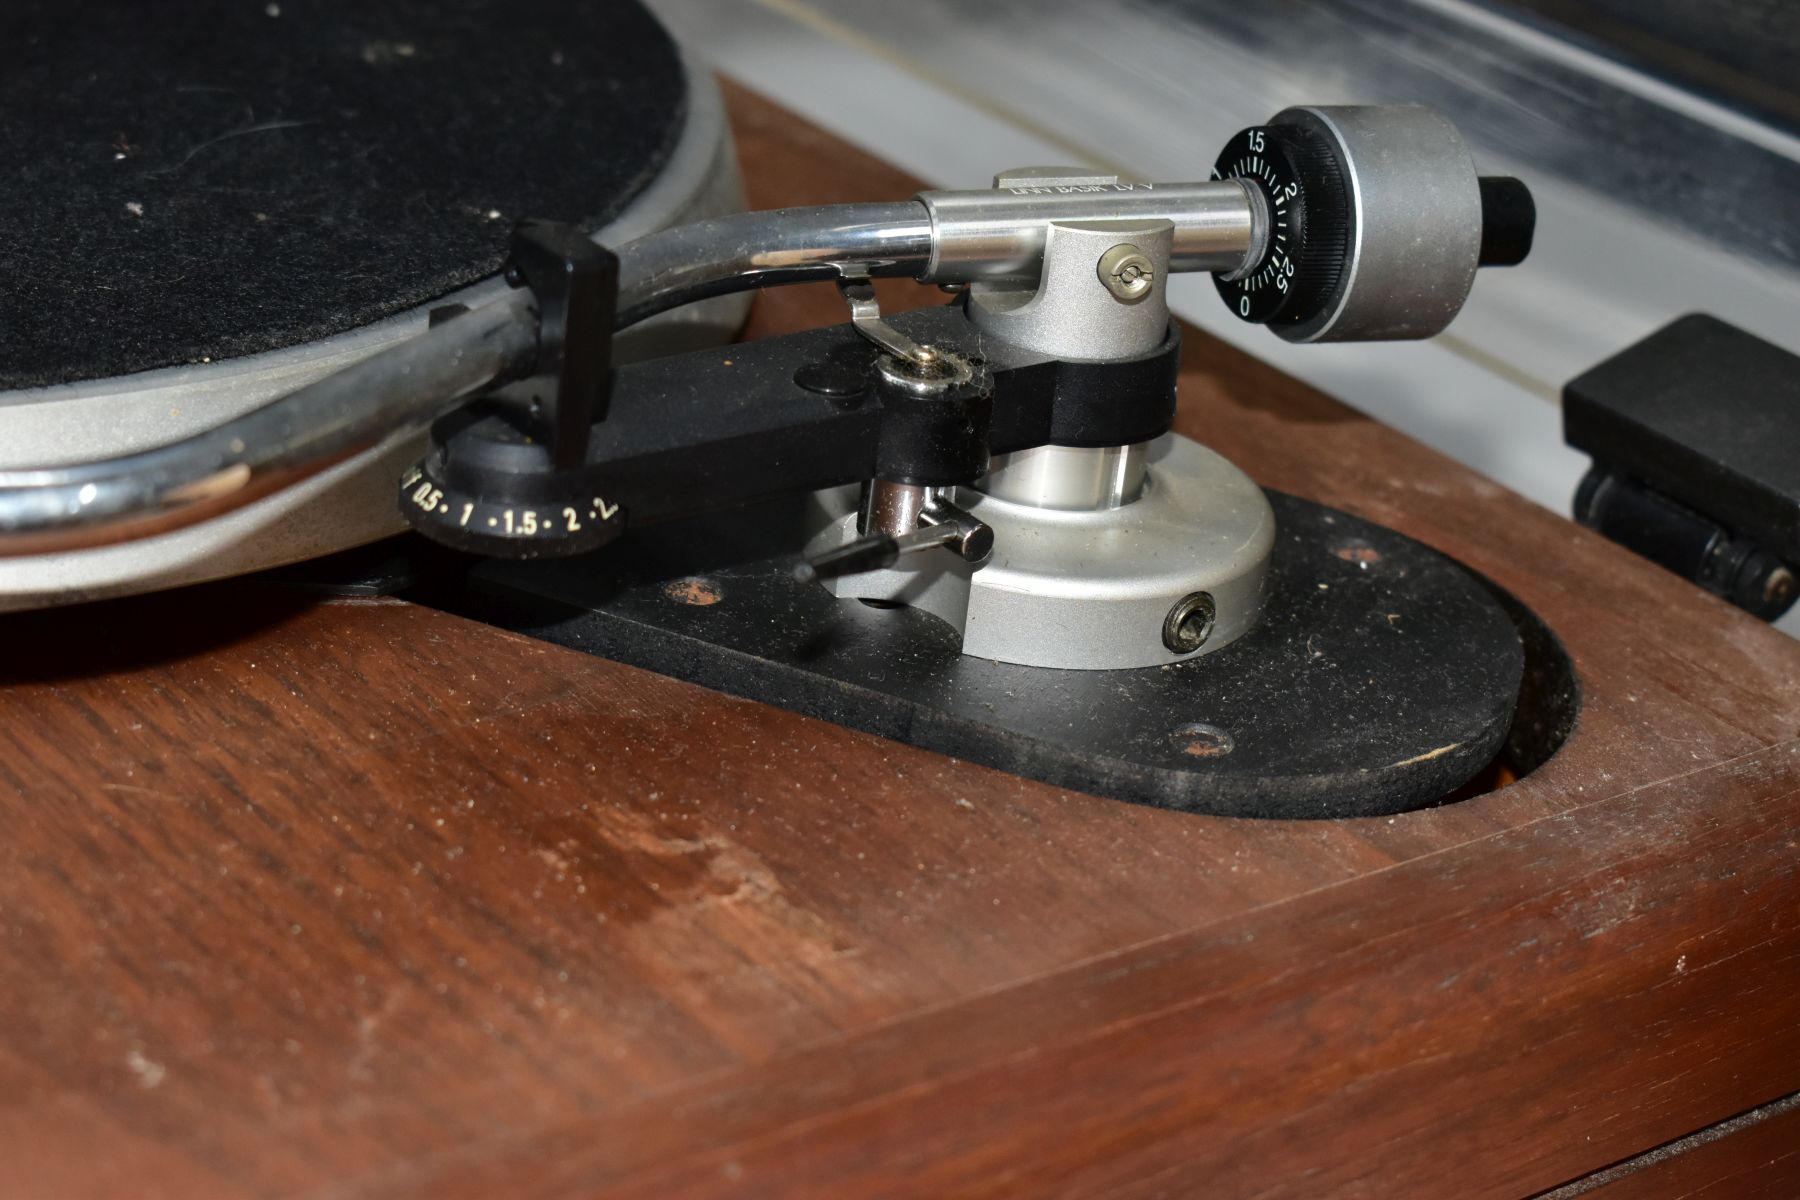 A TELEDYNE ACOUSTIC RESEARCH THE AR TURNTABLE with walnut plinth, two cartridge heads one with an - Bild 6 aus 8